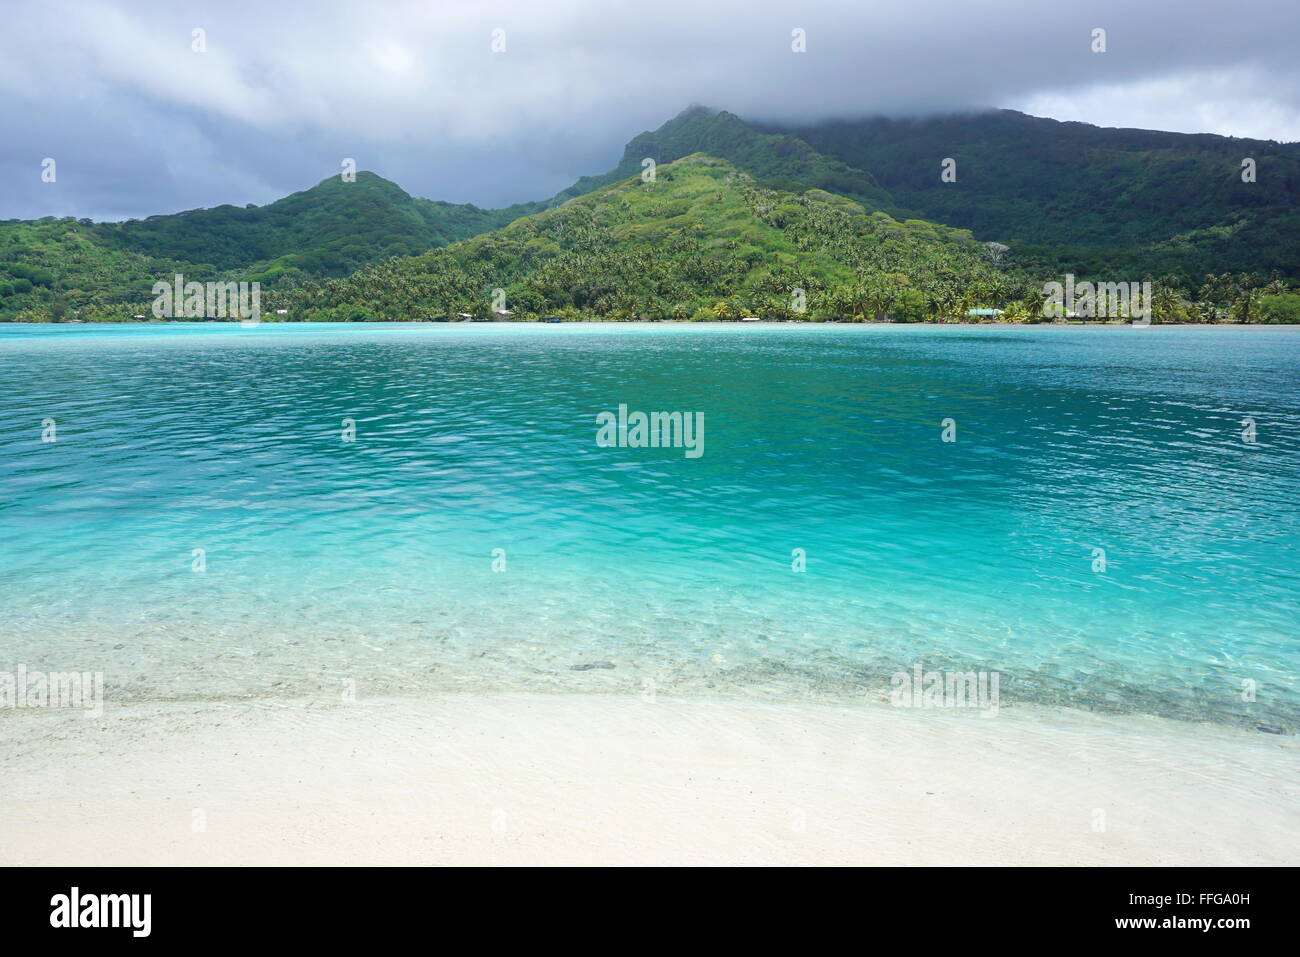 Landscape of Huahine island seen from a white sand beach with turquoise water in foreground, Pacific ocean, French Polynesia Stock Photo